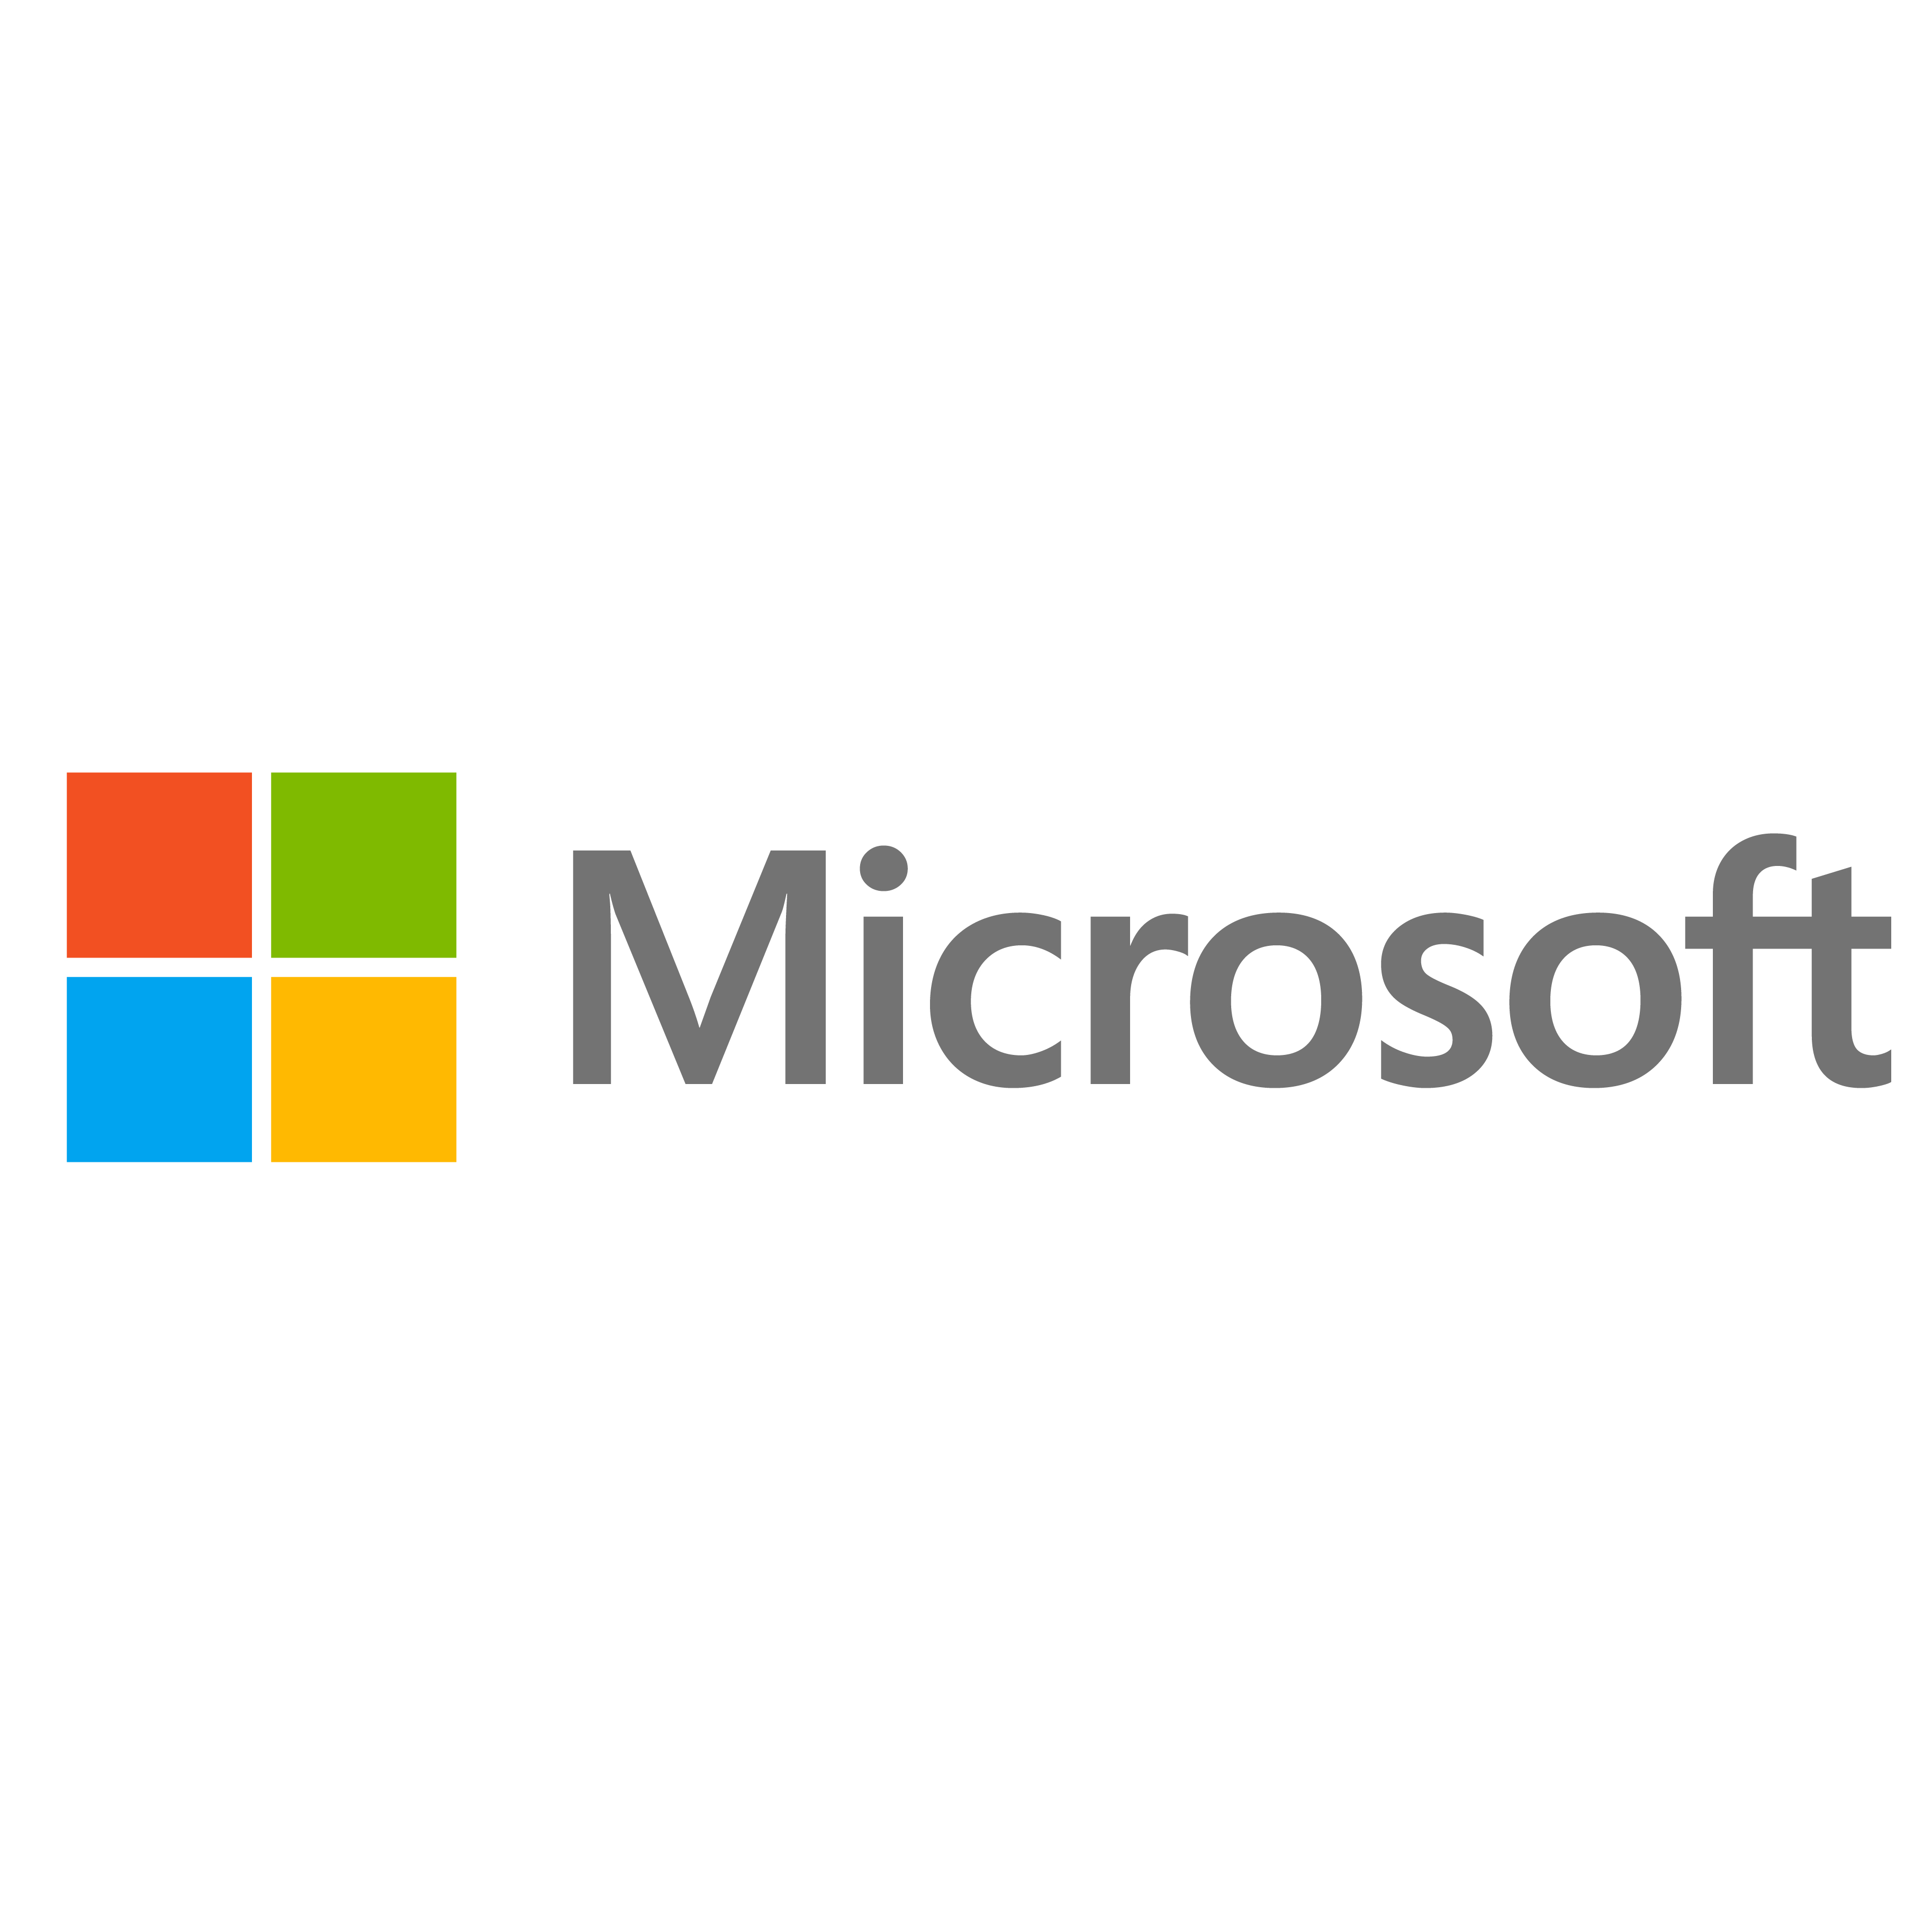 The new Microsoft logo in ultra HD glory, Microsoft PNG HD Pictures - Free PNG